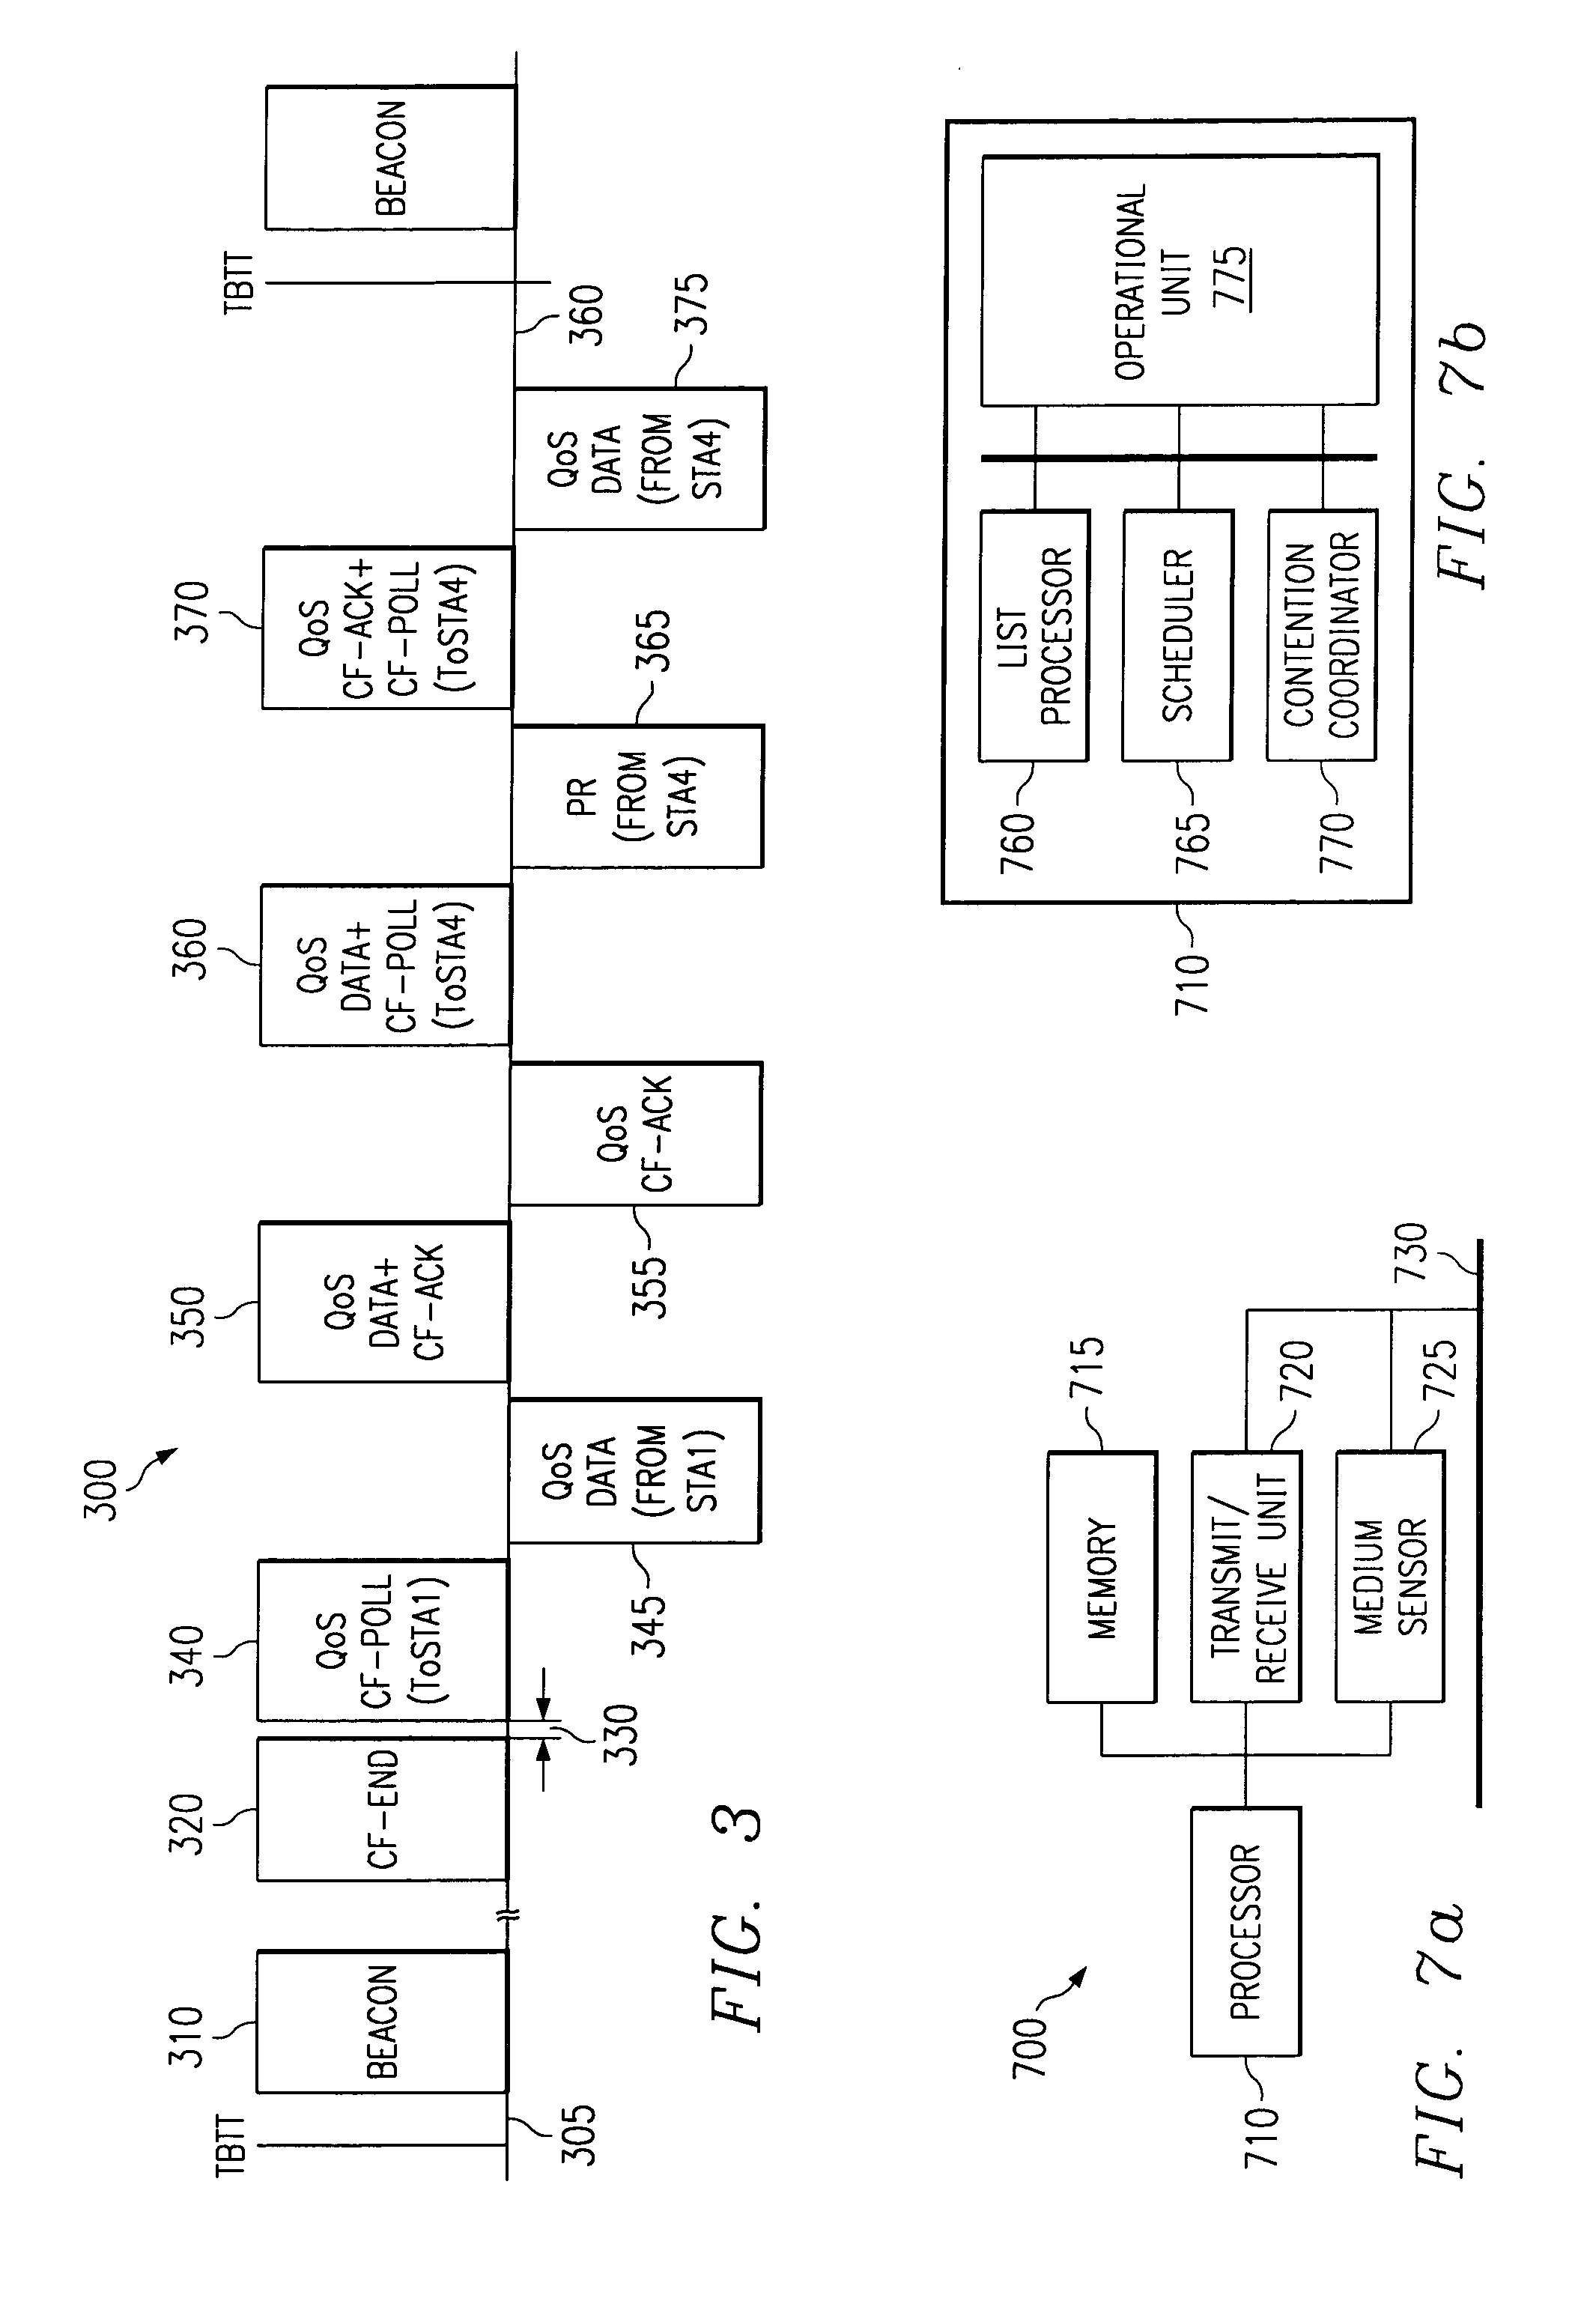 Unified channel access for supporting quality of service (QoS) in a local area network